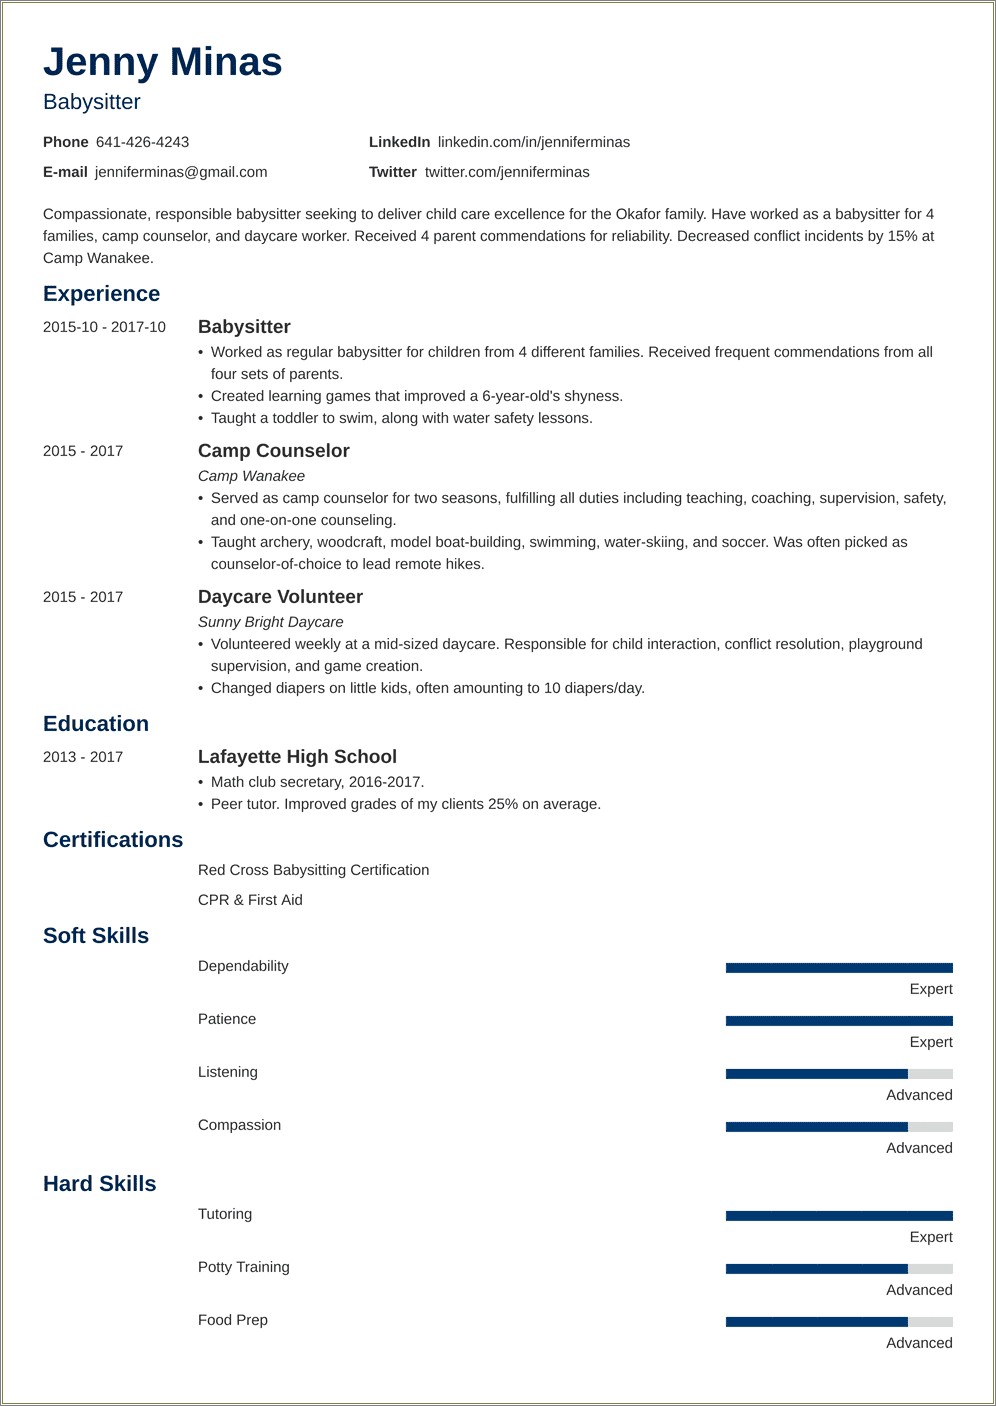 Profesional Resume With Nanny Past Work Experience